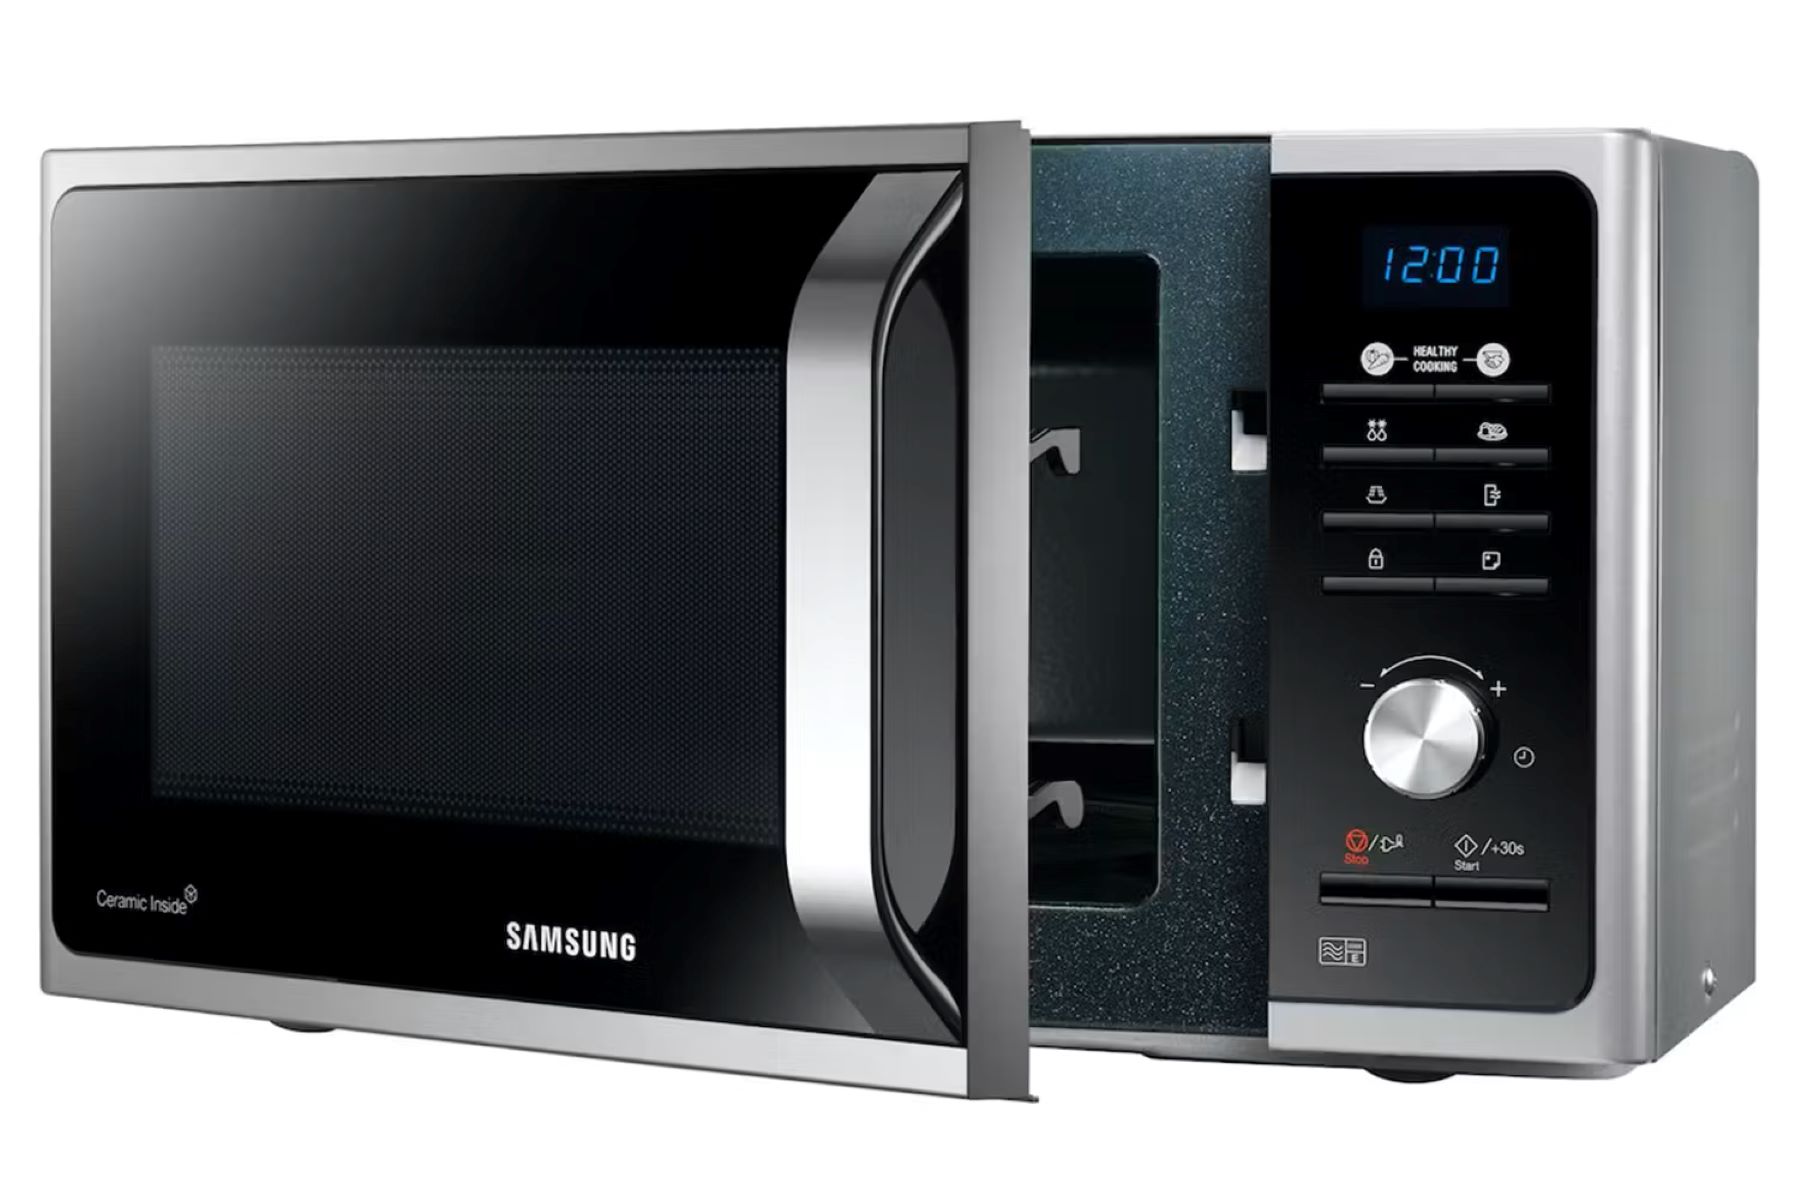 How To Fix The Error Code E-B1 For Samsung Microwave